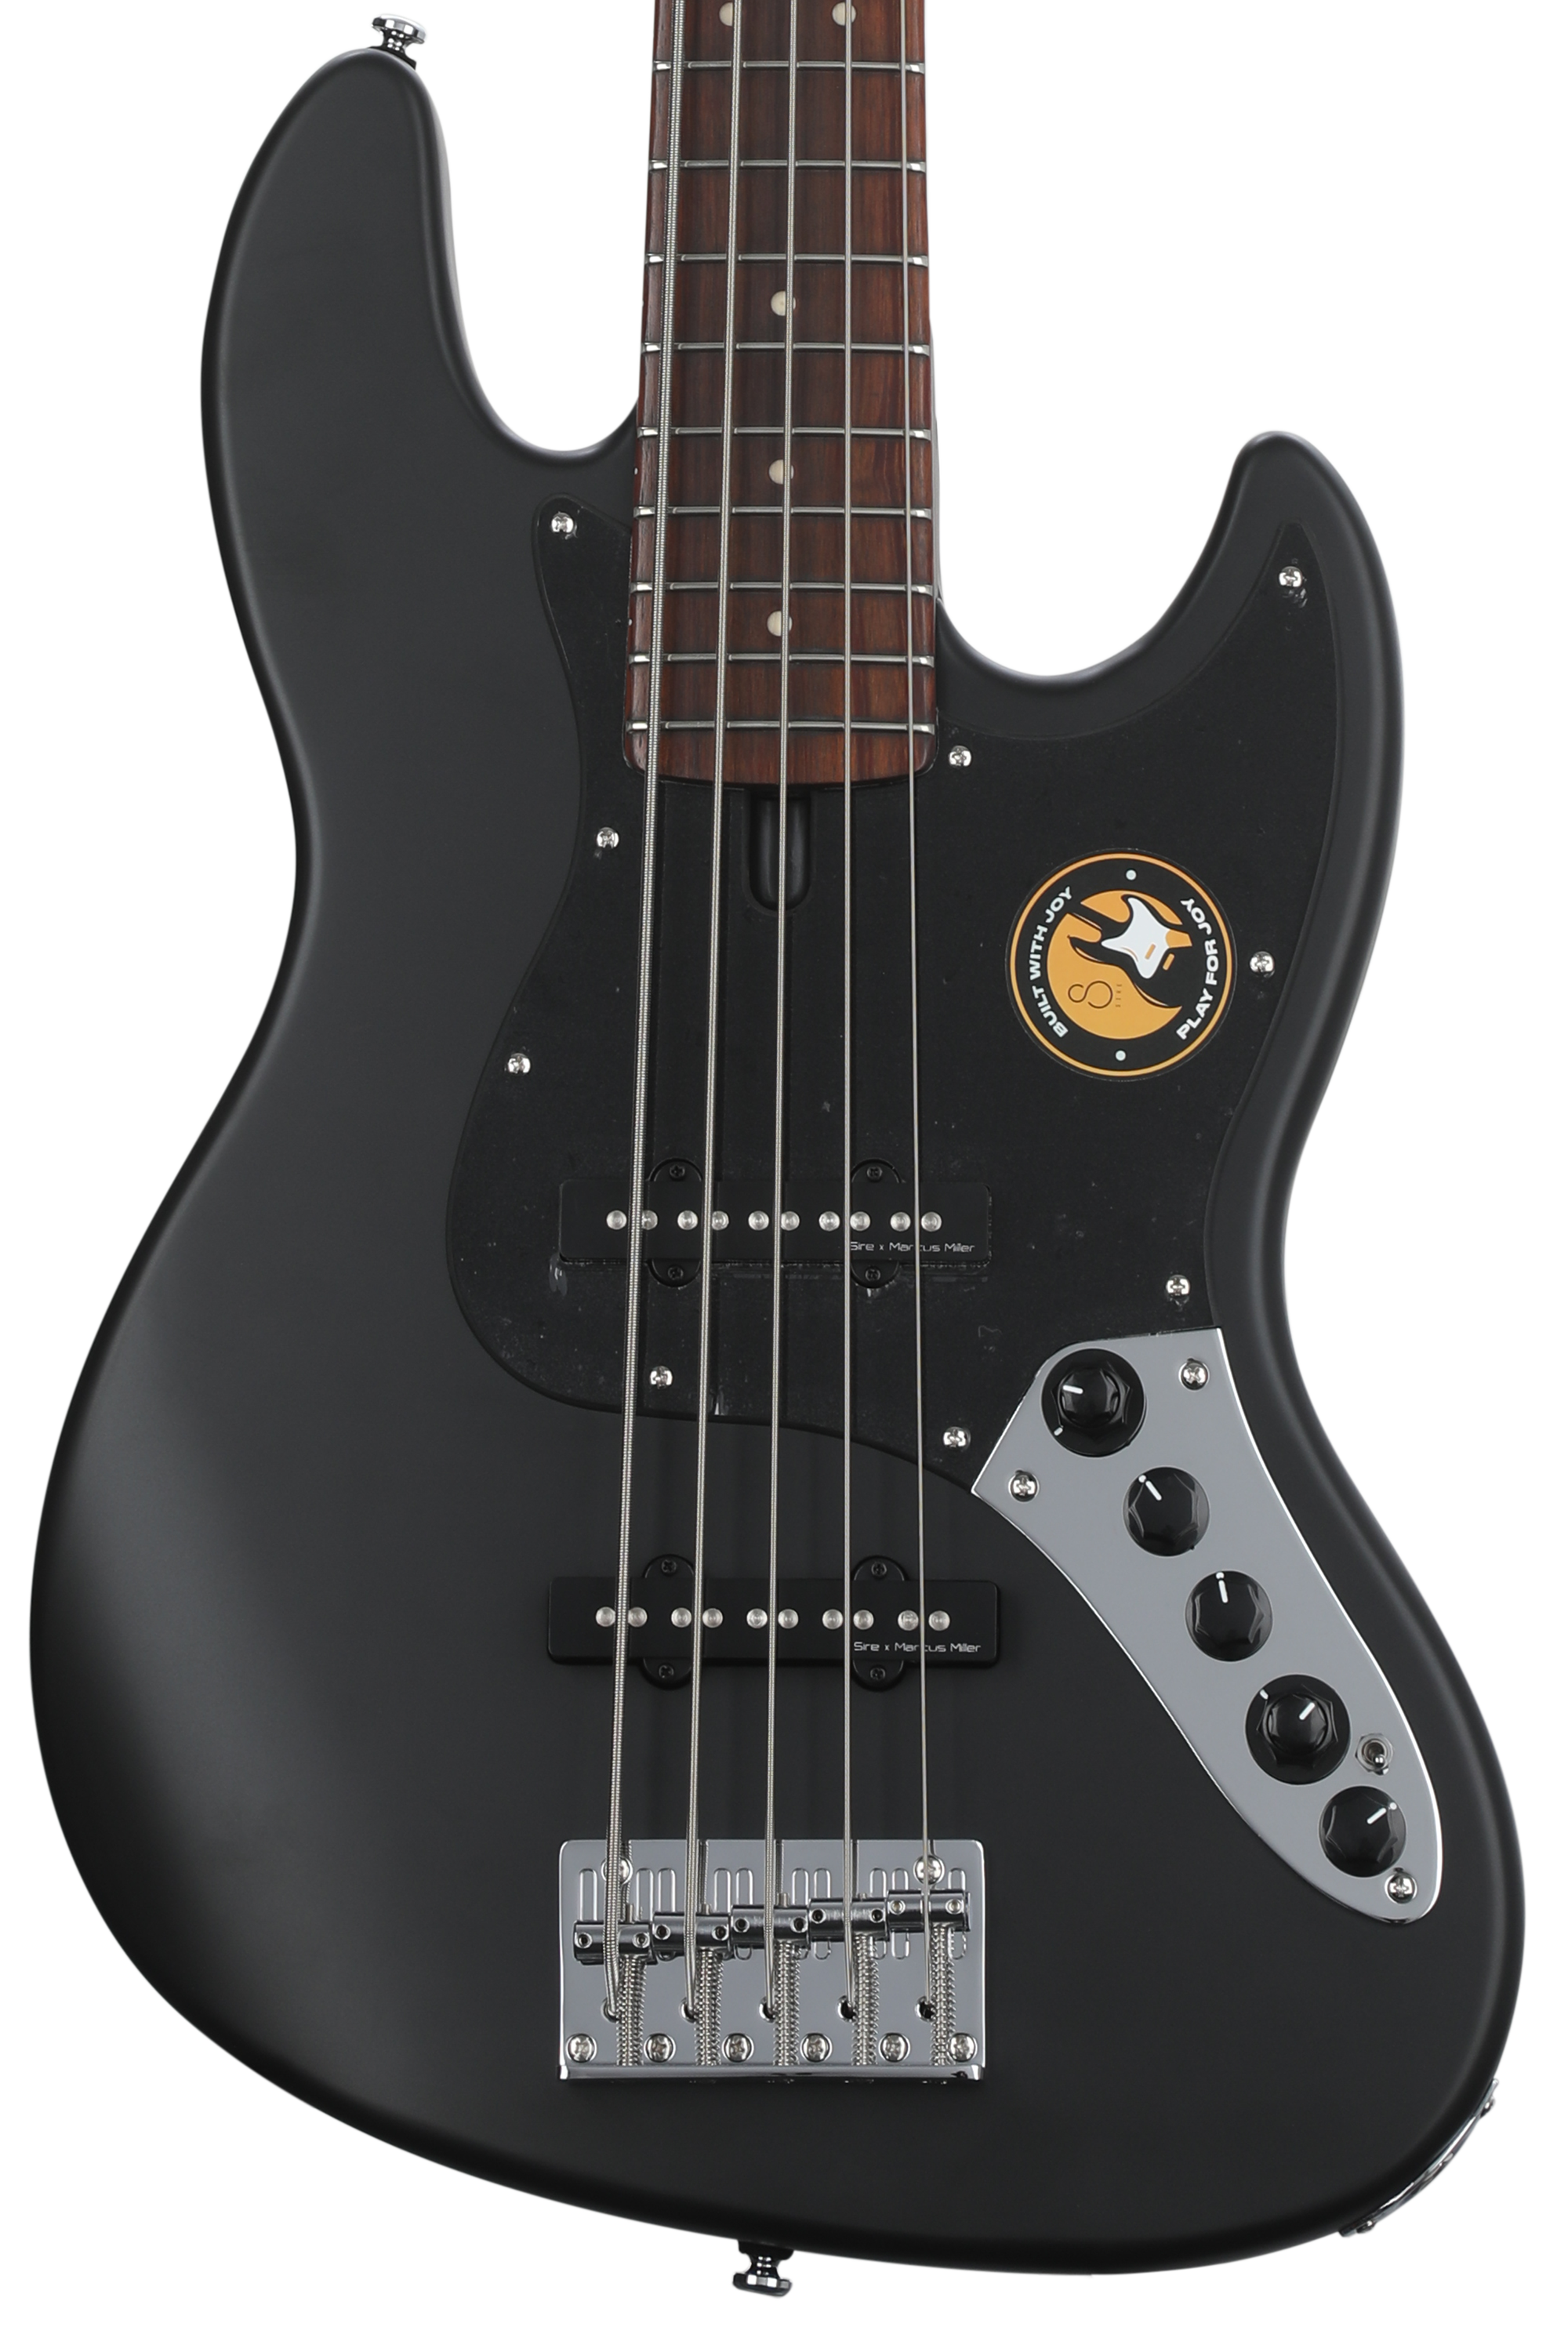 Sire Marcus Miller V3P 2nd Generation 5-string Bass Guitar- Black 